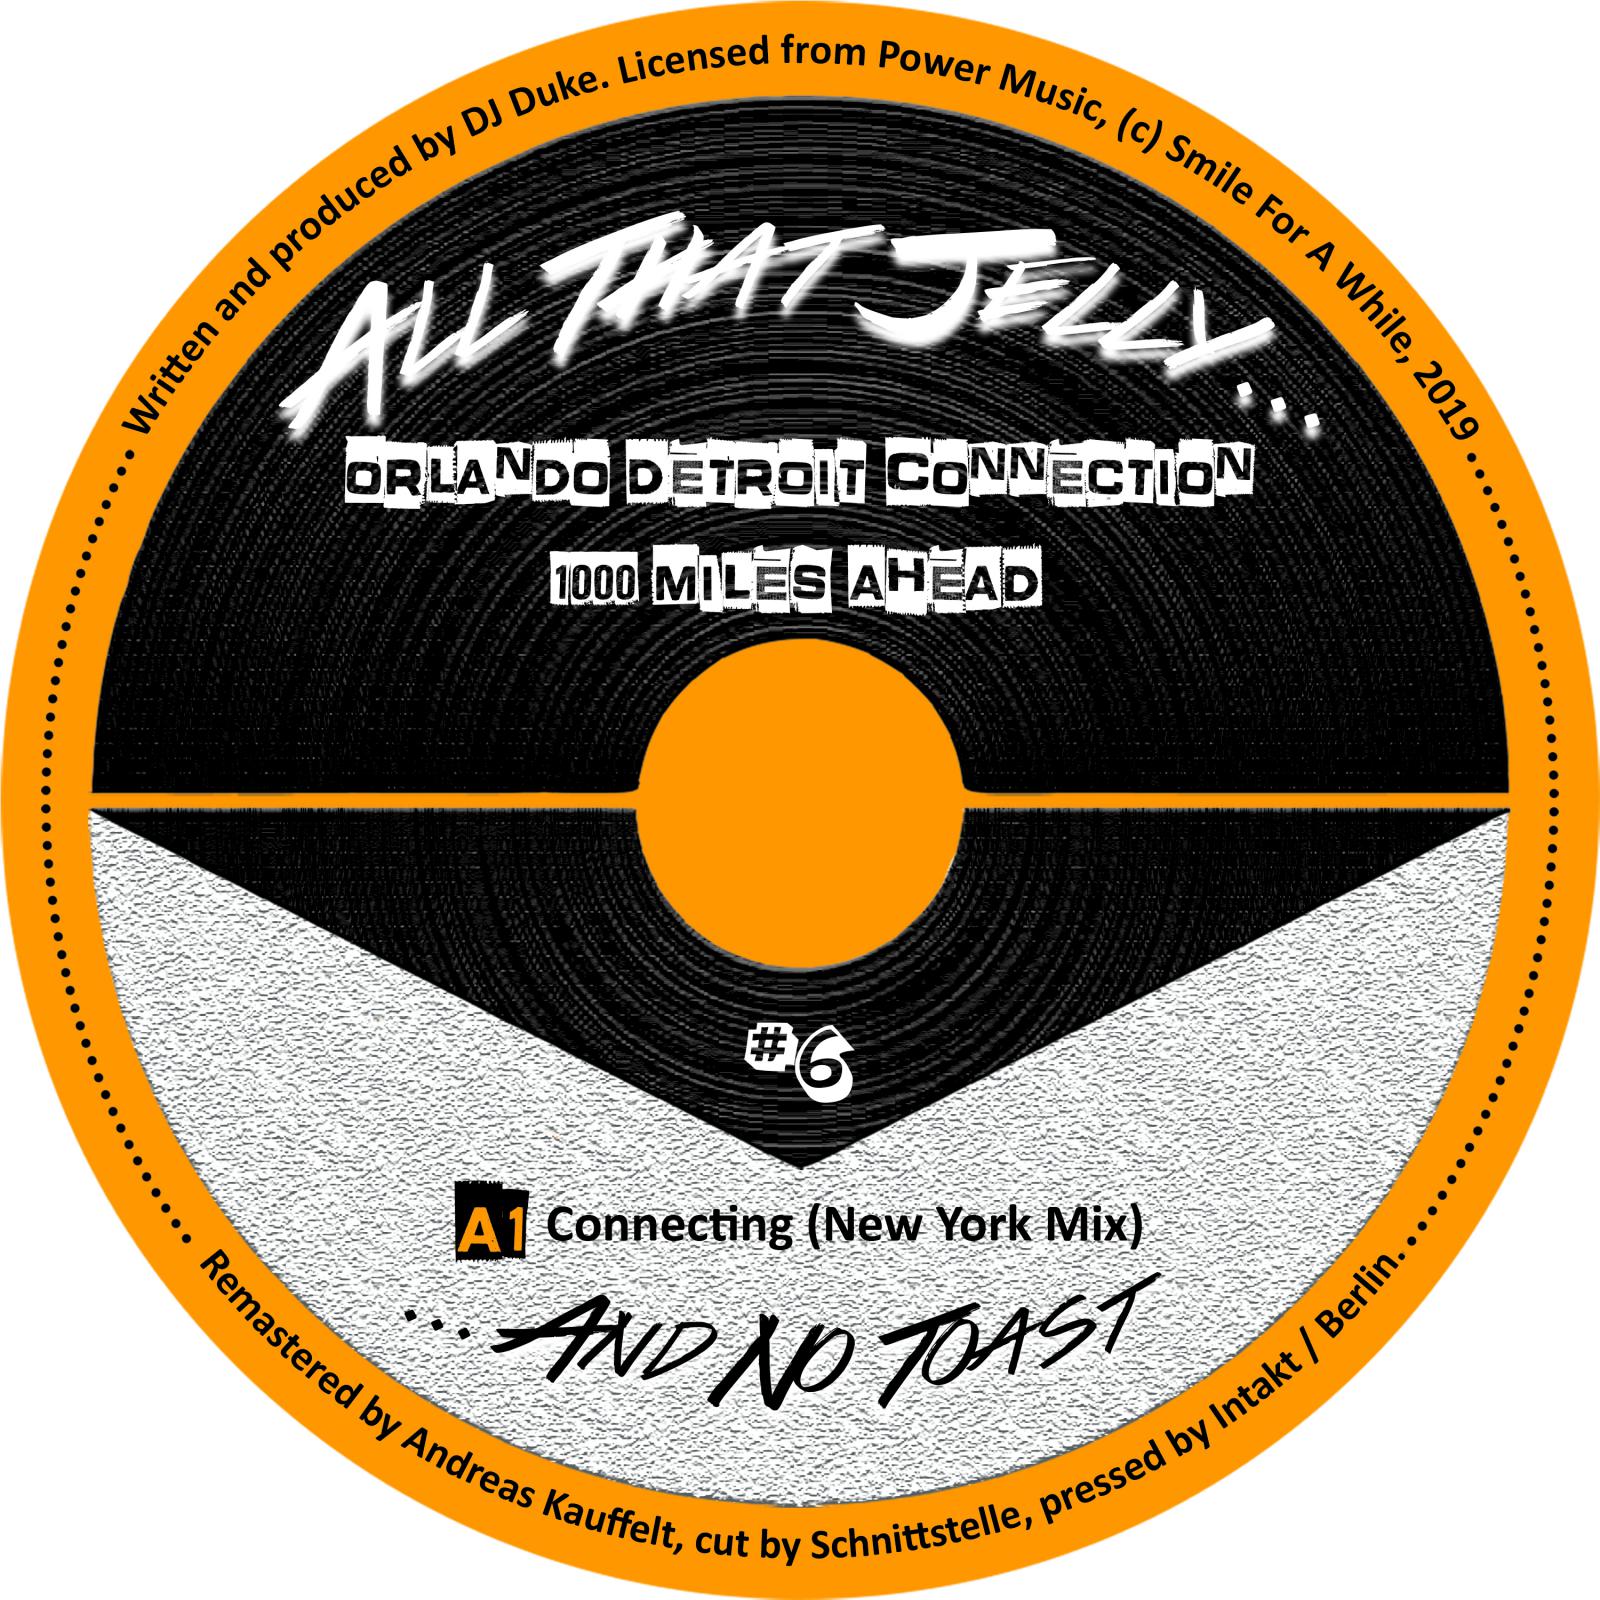 Orlando Detroit Connection - 1000 Miles Head - ATJ005 - ALL THE JELLY